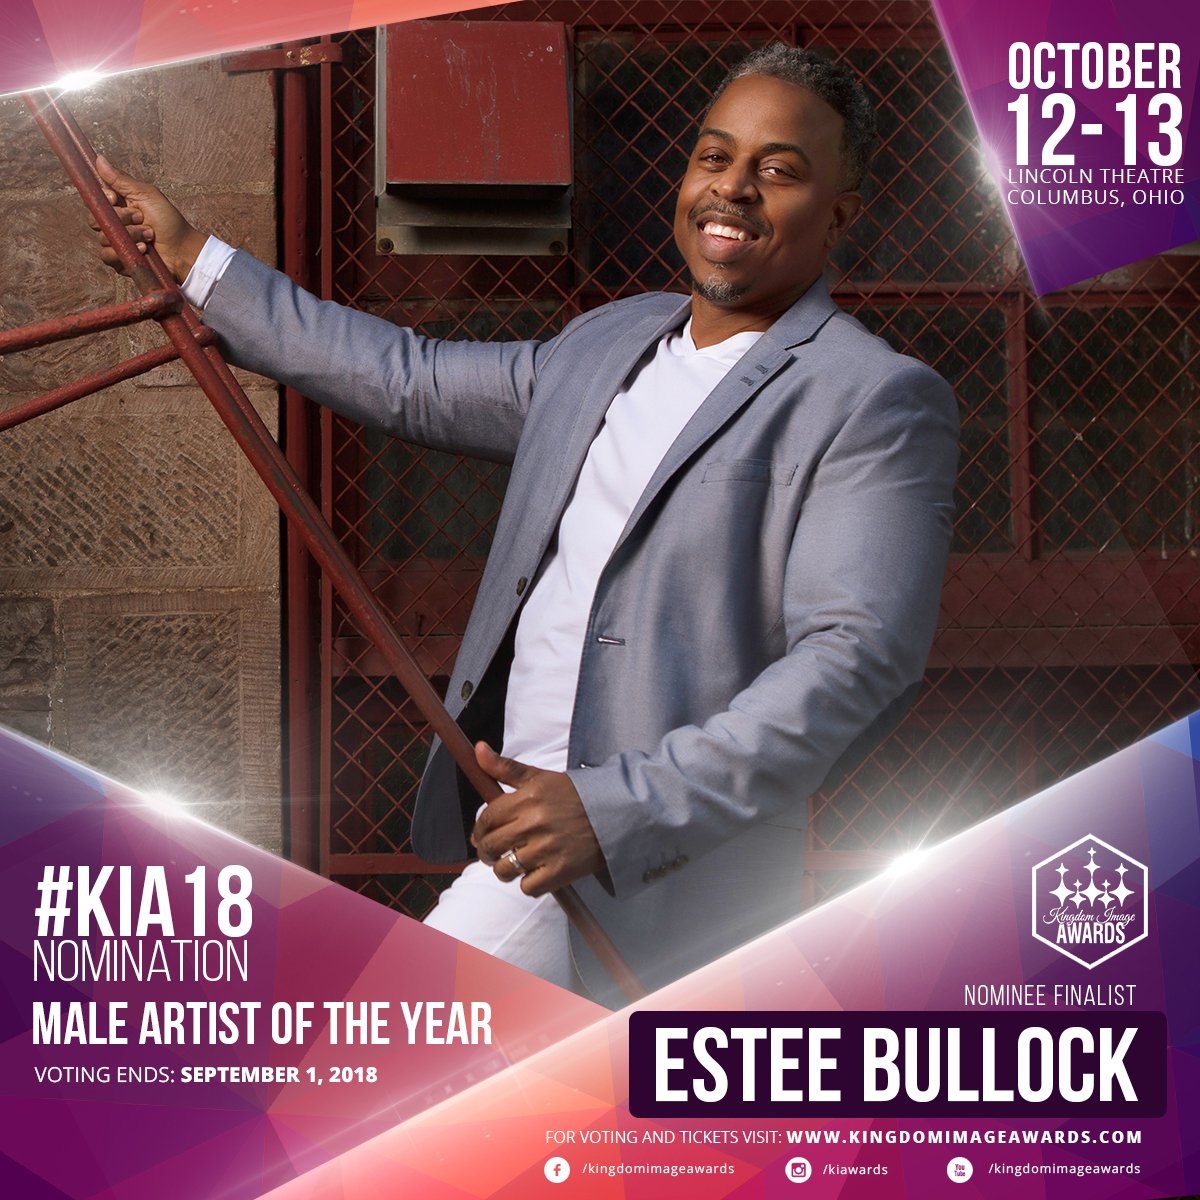 RT @MrEsteeBullock: Hey guys! I've been nominated by the Kingdom Image Awards @Ki_Awards in the MALE ARTIST OF THE YEAR category. I would love for you to support by voting at KingdomImageAwards.com Thanks in advance! #EsteeBullock #ForTheOneILove @Asca…